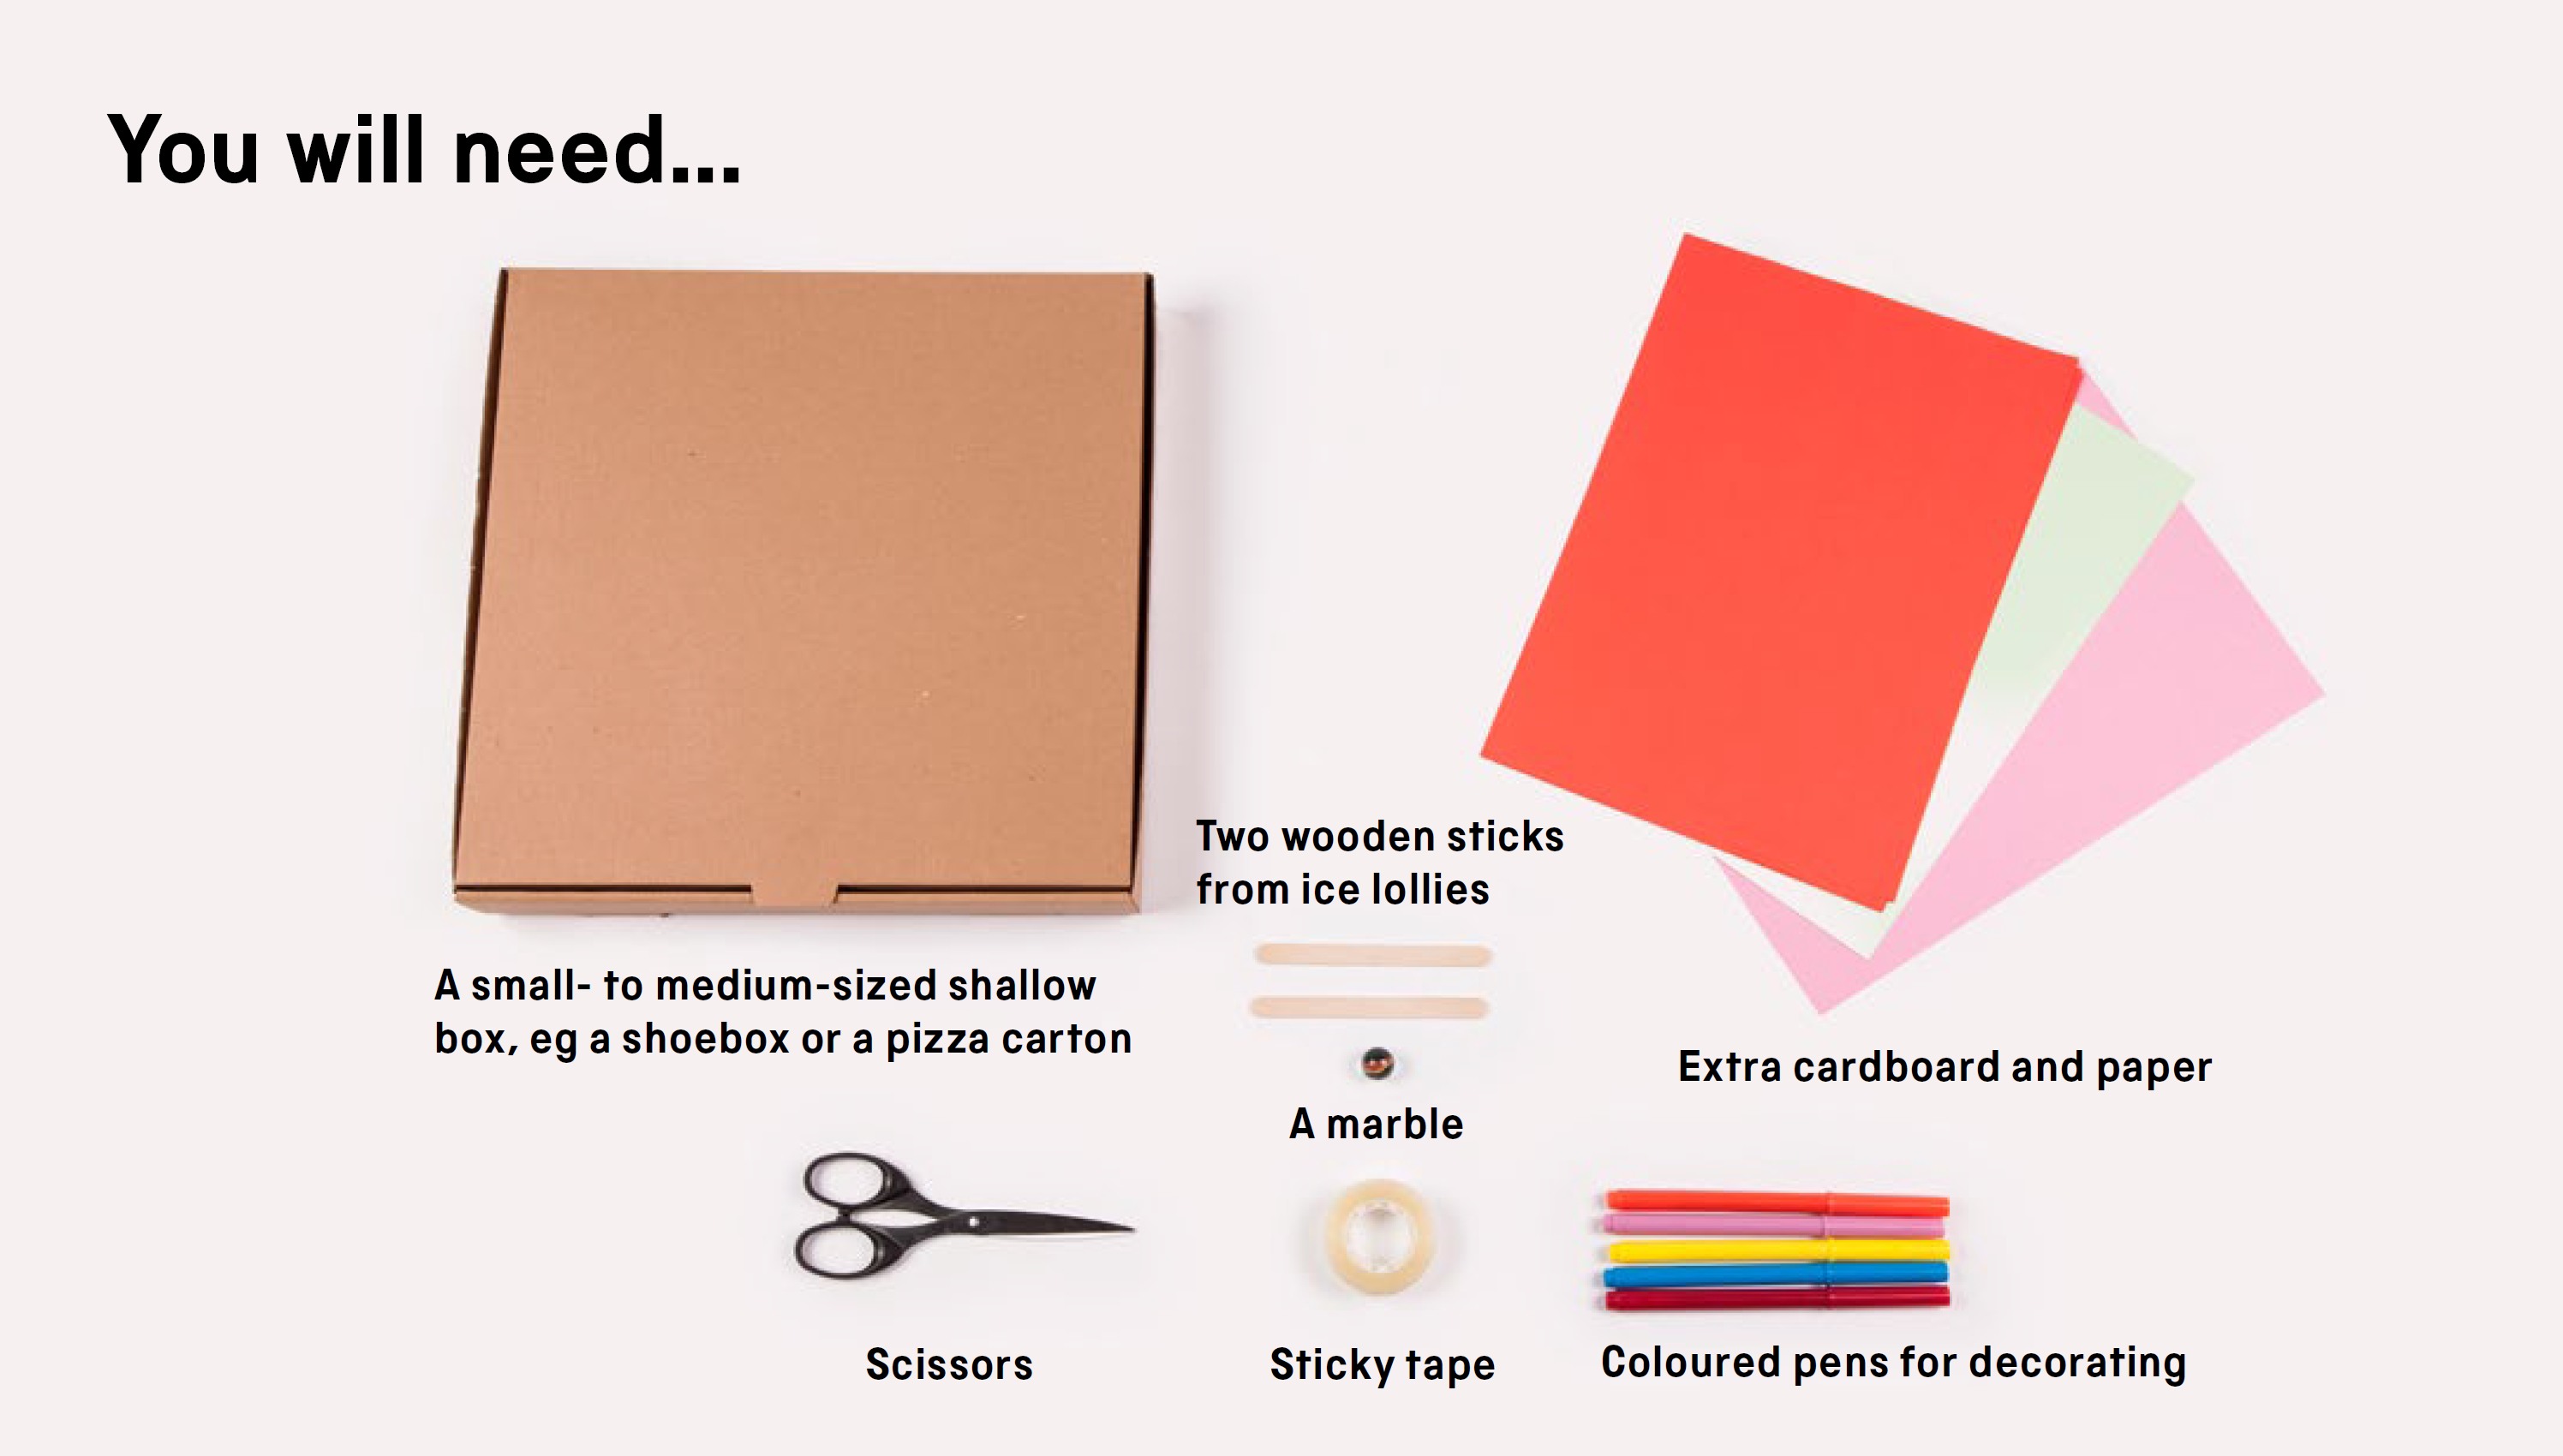 You will need: a small- to medium-sized shallow box, e.g. a shoebox or a pizza carton, two ice lolly sticks, extra cardboard or paper, coloured pens for decorating, a marble, sticky tape and scissors